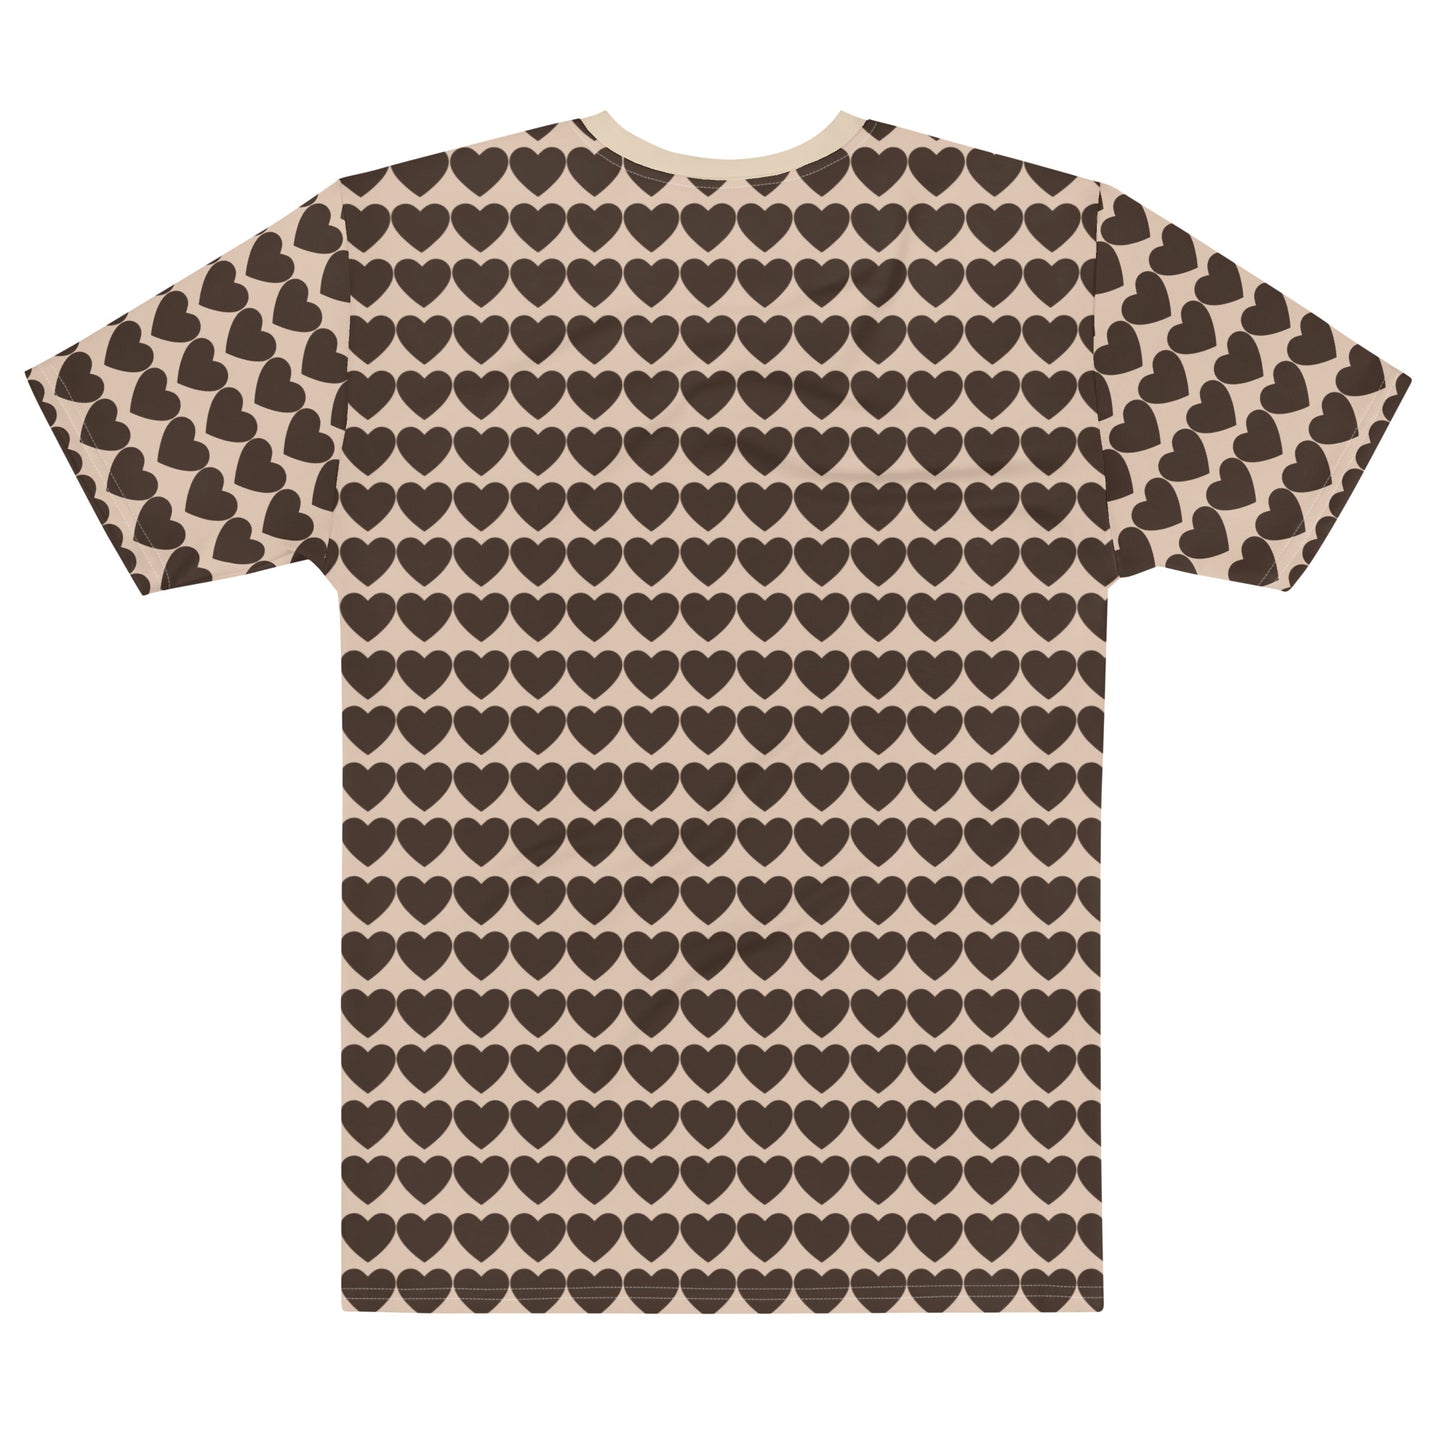 Heart Pattern - Inspired By Harry Styles - Sustainably Made Men’s Short Sleeve Tee